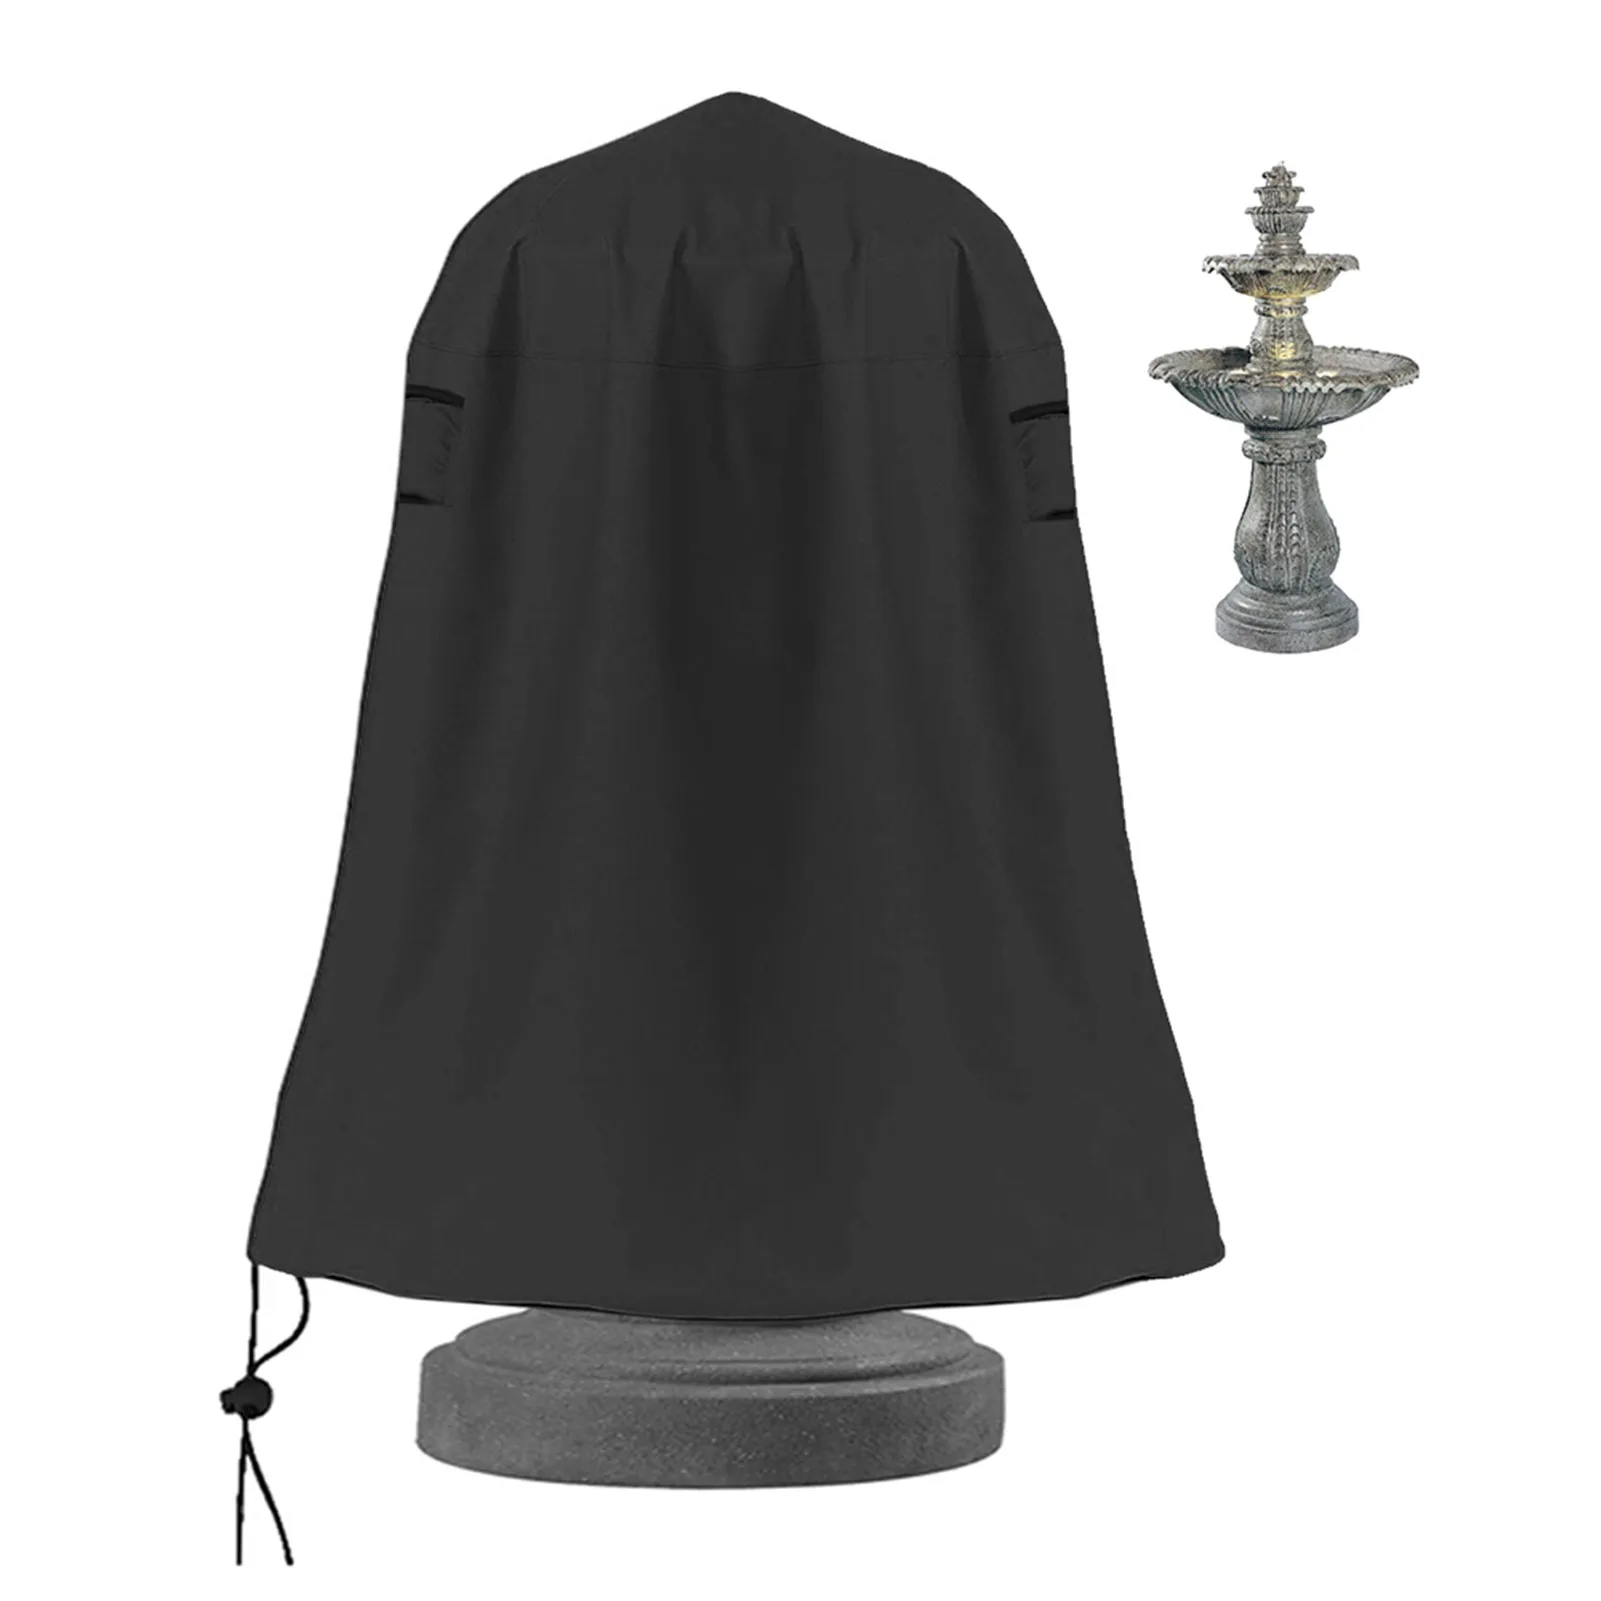 NEWFOM Garden Fountain Cover,Waterproof and Dustproof Outdoor Cover with String Hem Made of Heavy Duty 420D Polyester 16.5 15.6 33 inches 